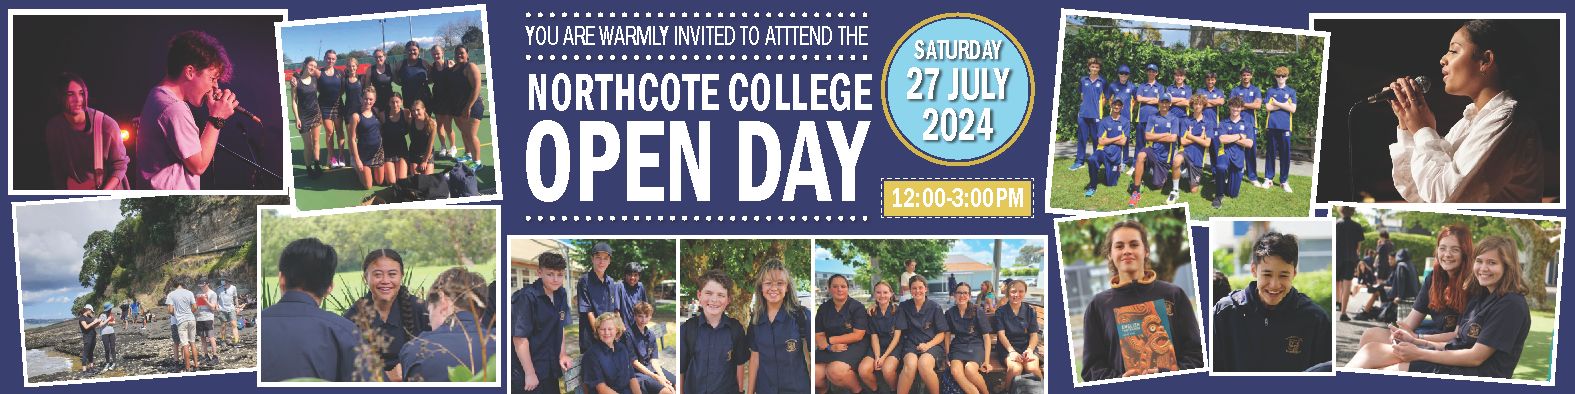 2024 NC OPEN DAY